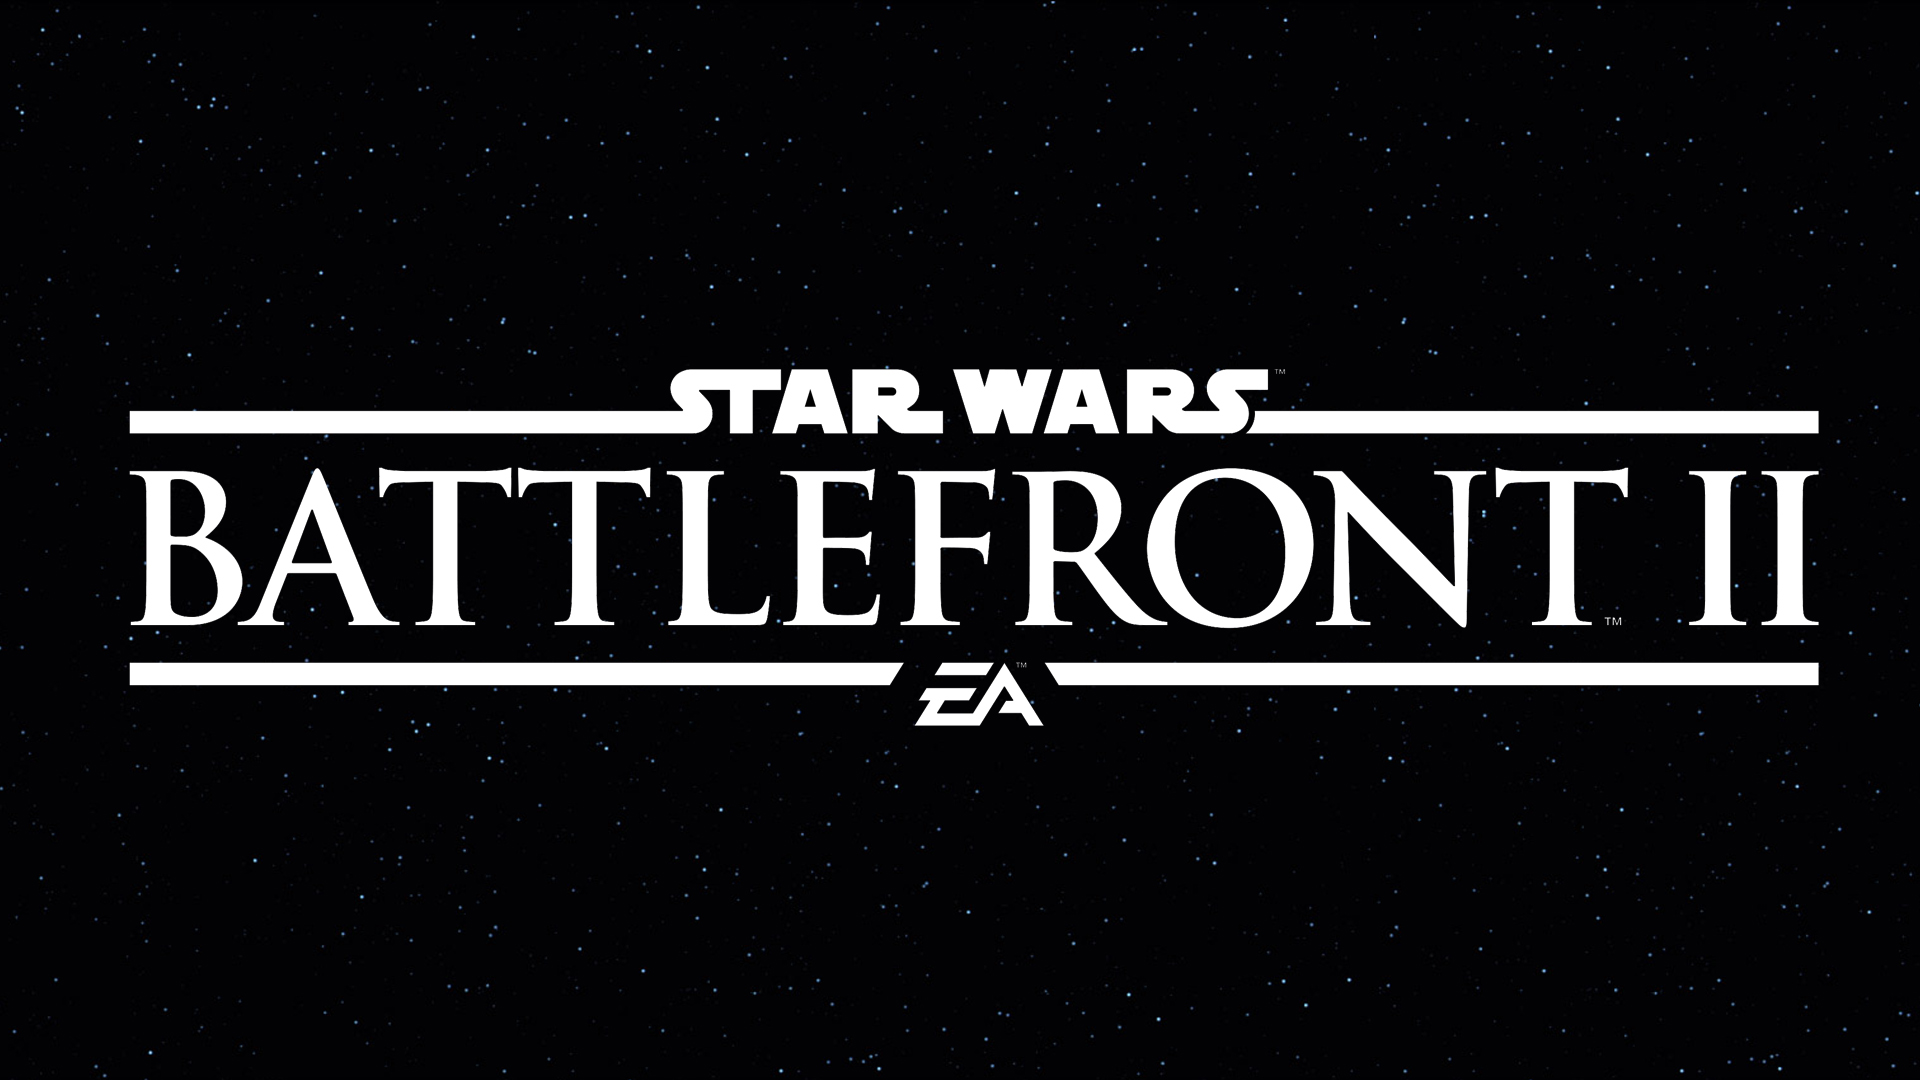 Star Wars Battlefront 2 announced, fall release incoming